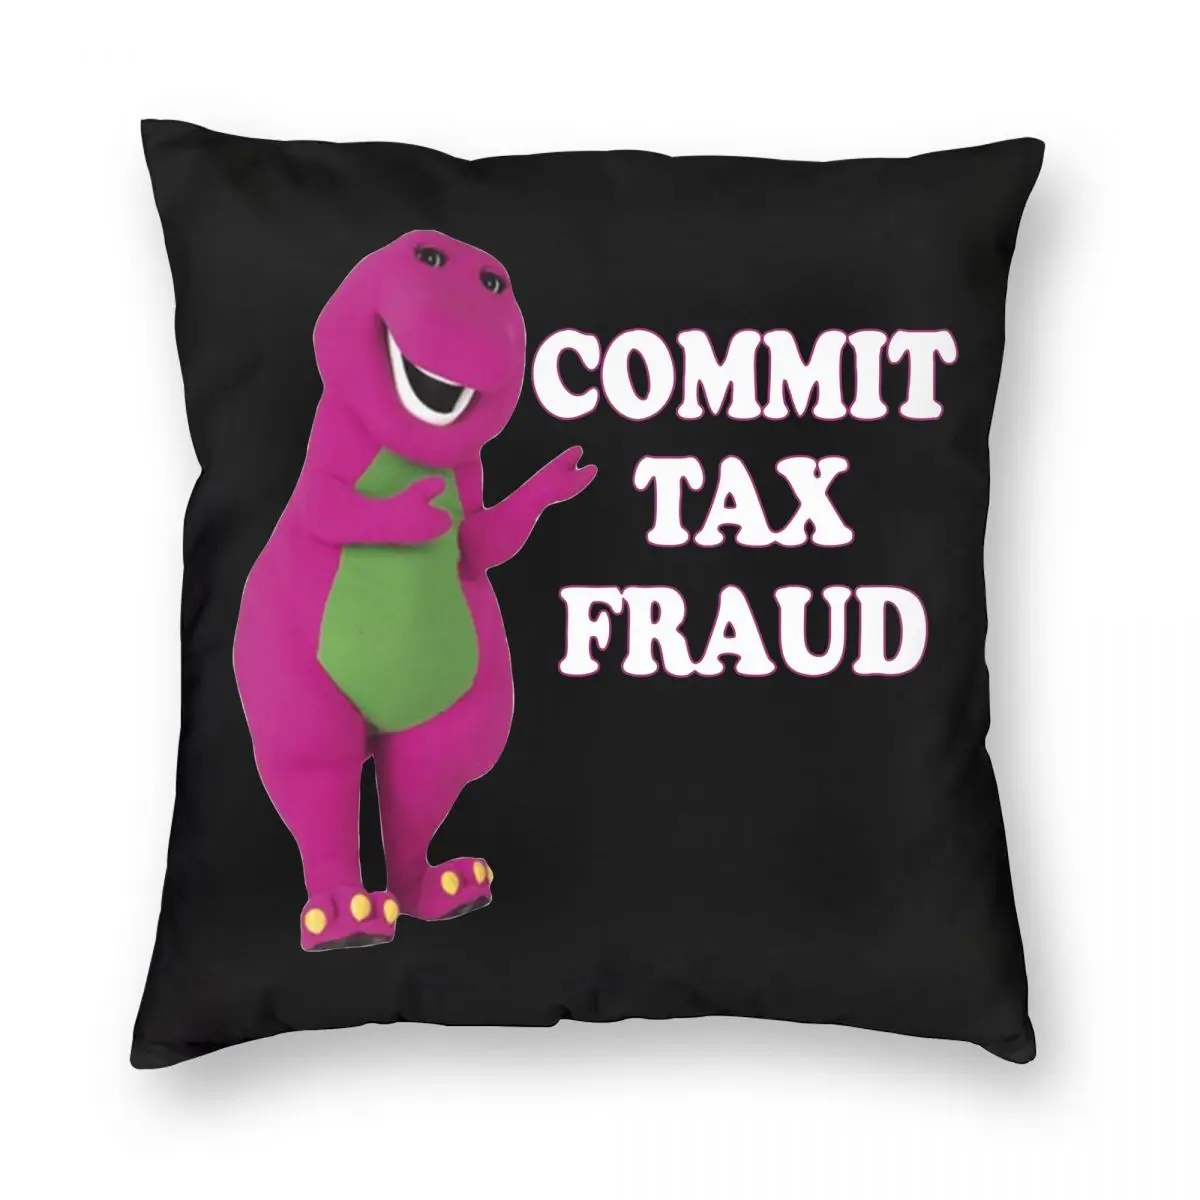 

Commit Tax Fraud Pillowcase Printed Polyester Cushion Cover Decoration Barney Purple Dinosaur Throw Pillow Case Cover Home 45*45